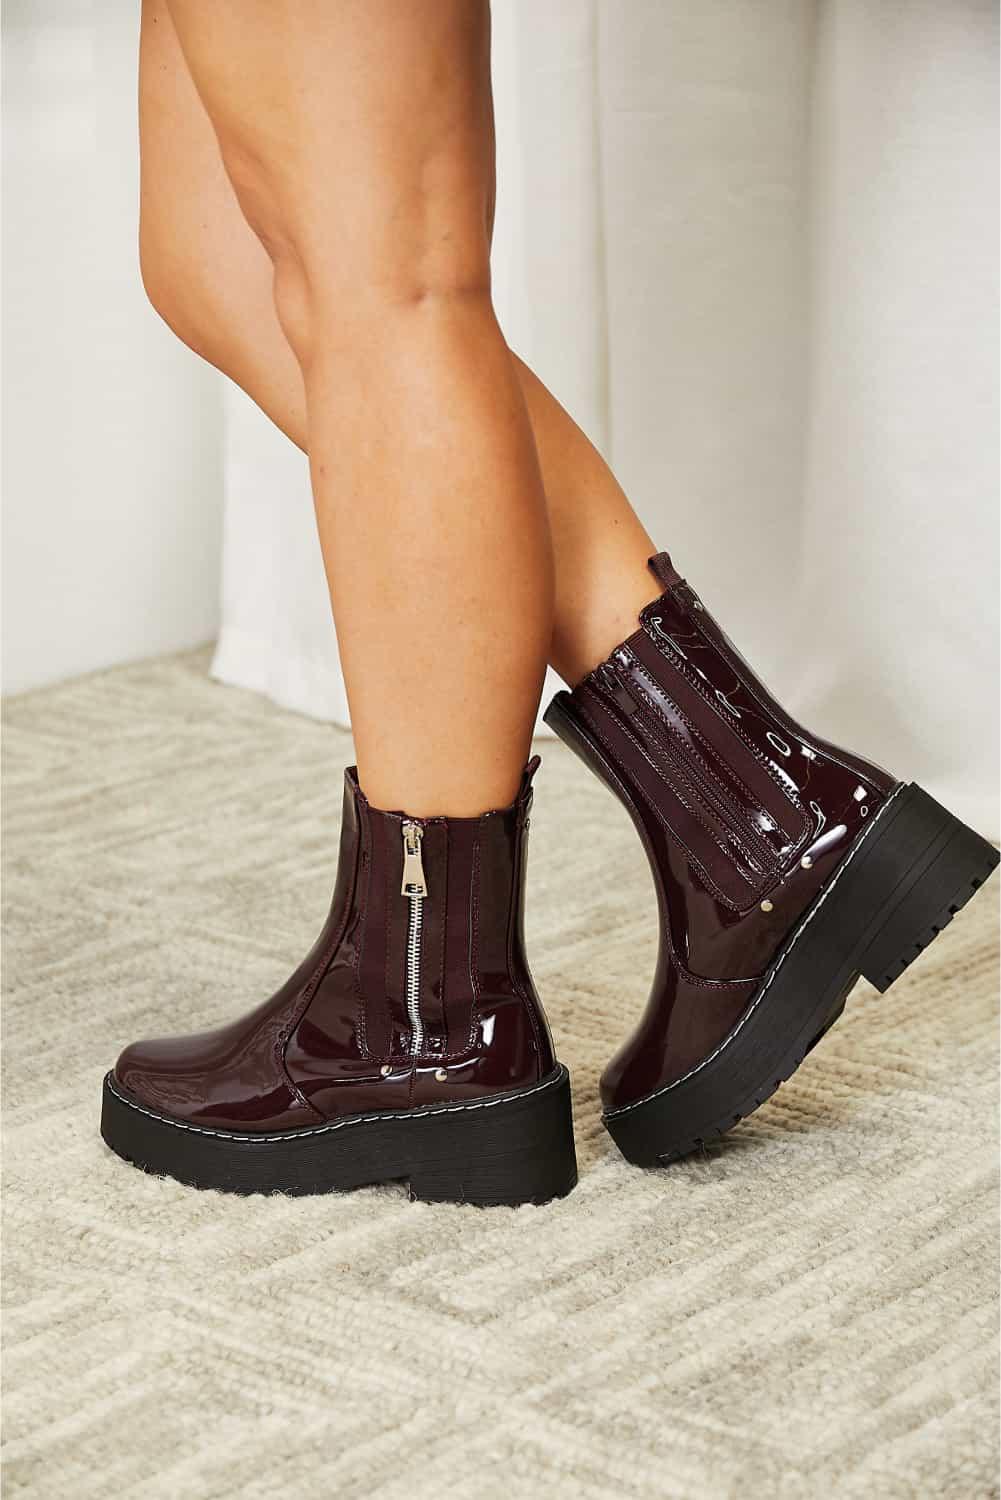 Women's Shoes - Boots Forever Link Side Zip Platform Boots